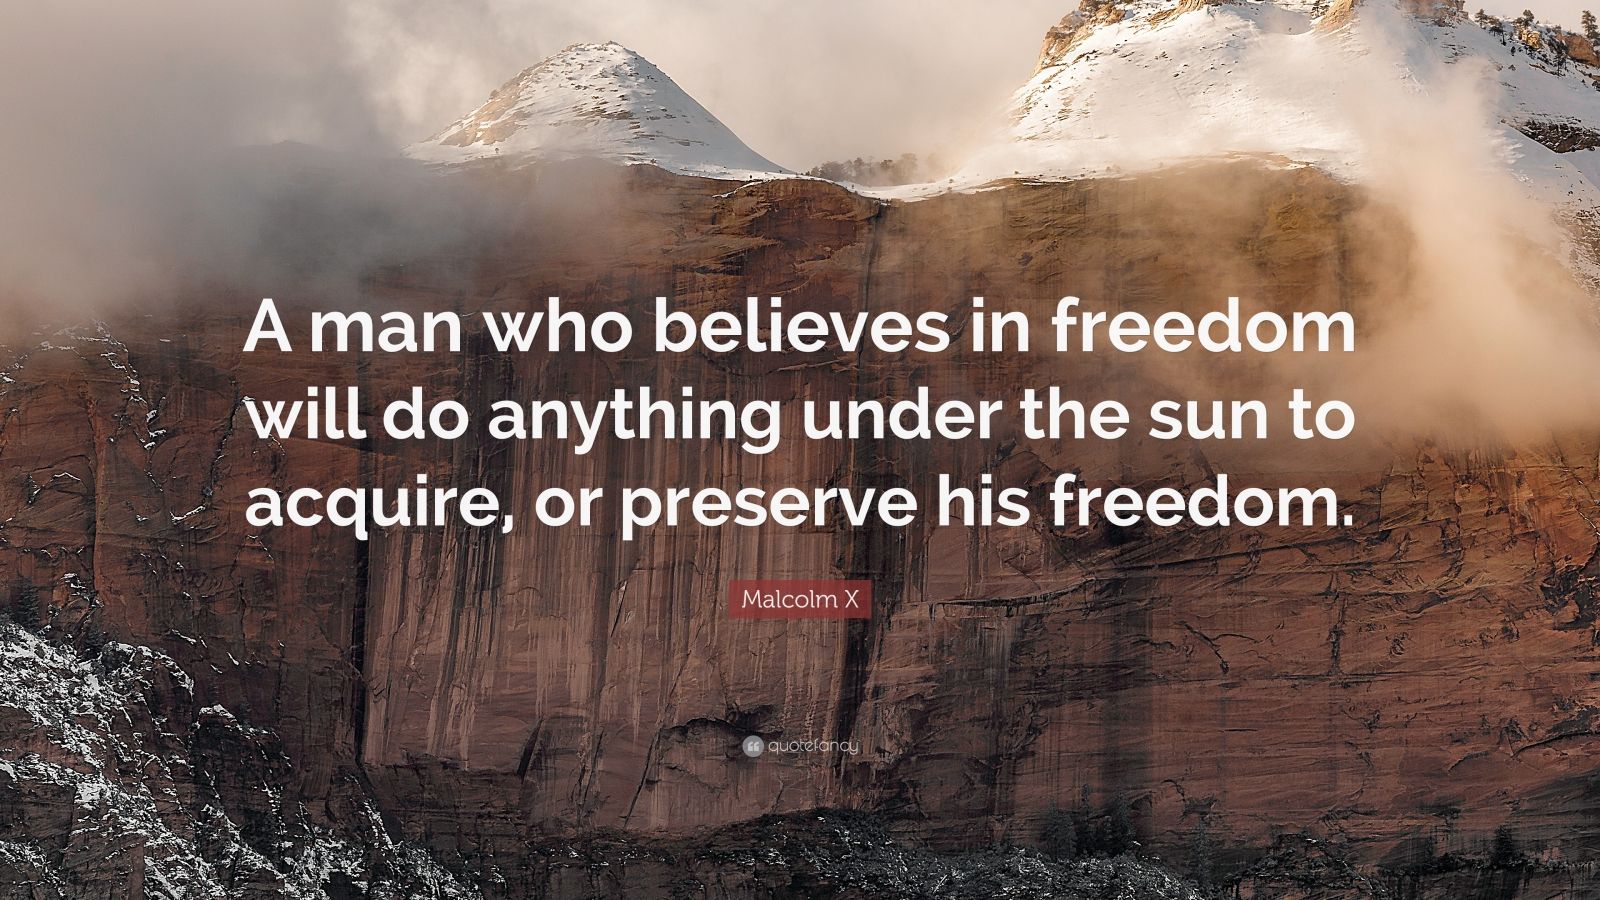 Malcolm X Quote A Man Who Believes In Freedom Will Do Anything Under The Sun To Acquire Or Preserve His Freedom 10 Wallpapers Quotefancy